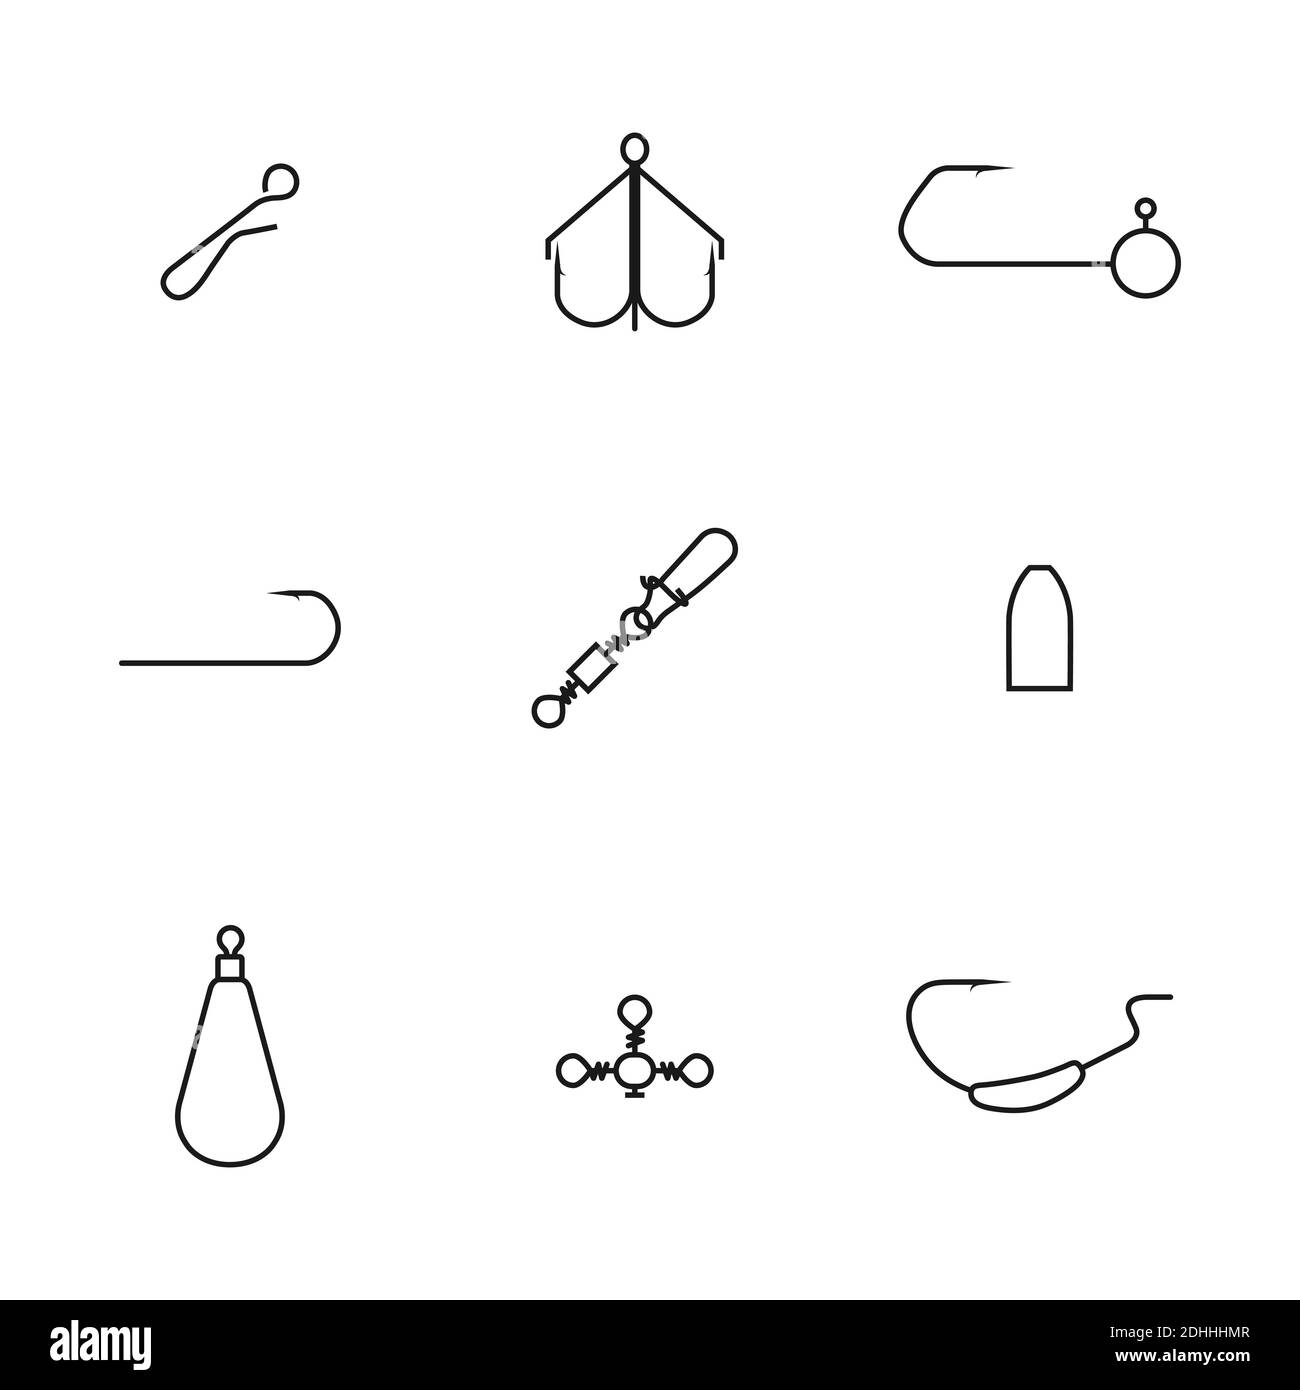 Set of spinning fishing accessories and tackles from thin lines. Various jig heads, lead sinkers, hooks, snaps hooked and swivels, vector illustration Stock Vector